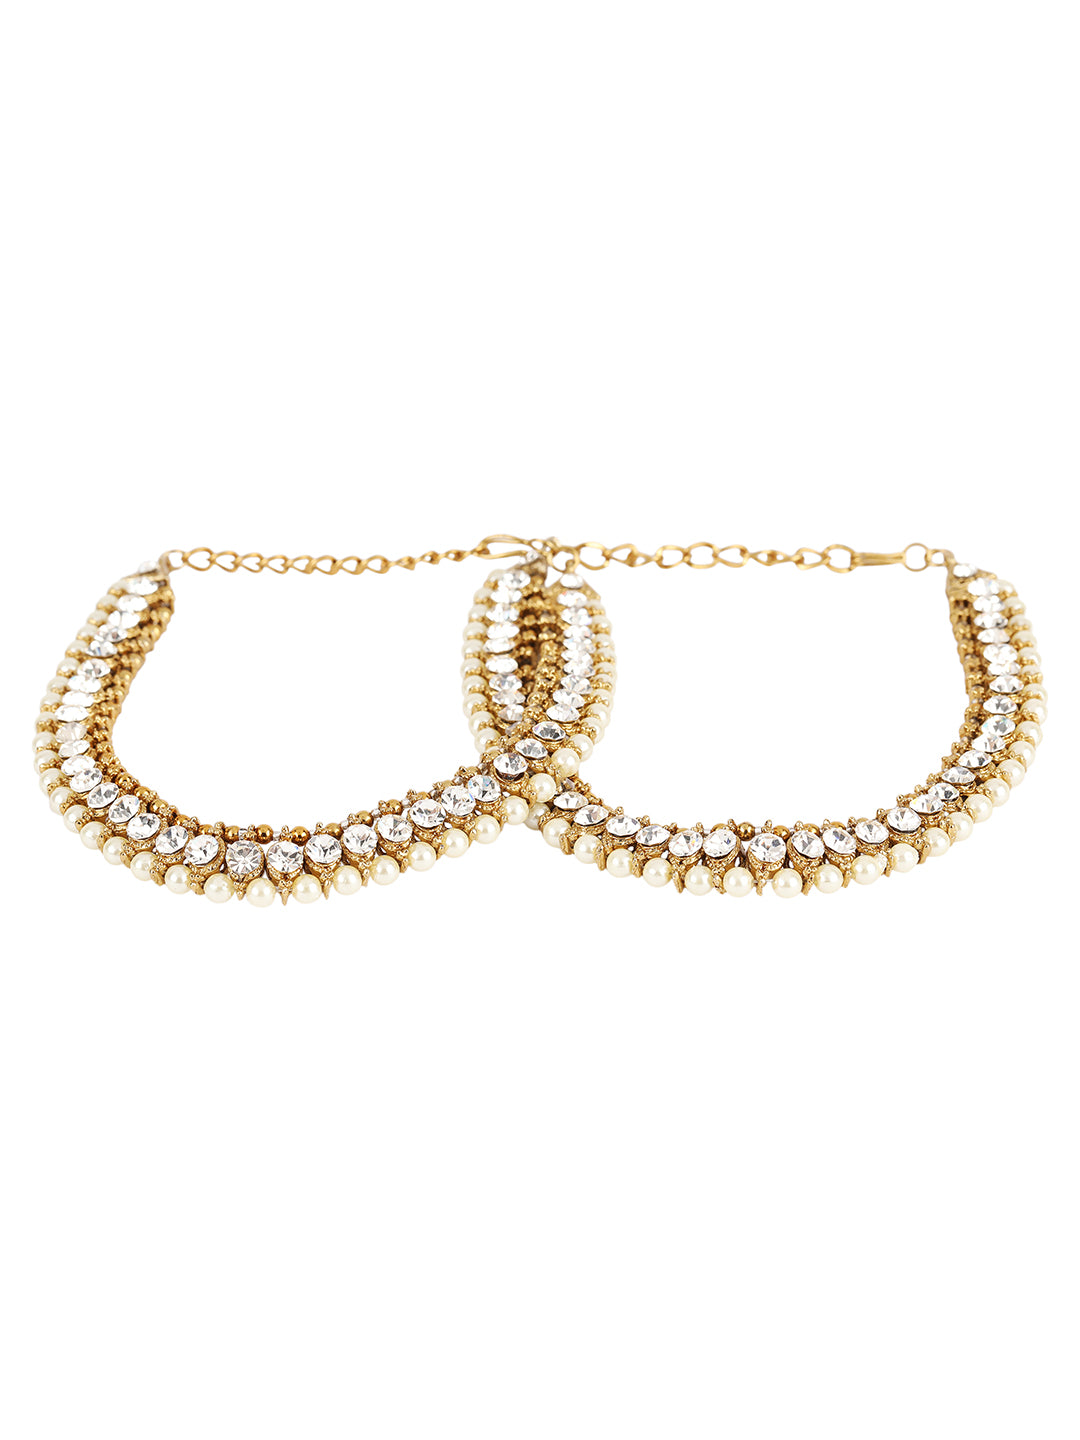 Women's Traditional Gold Plated Kundan Pearl Bridal Wear Anklet - Anikas Creation